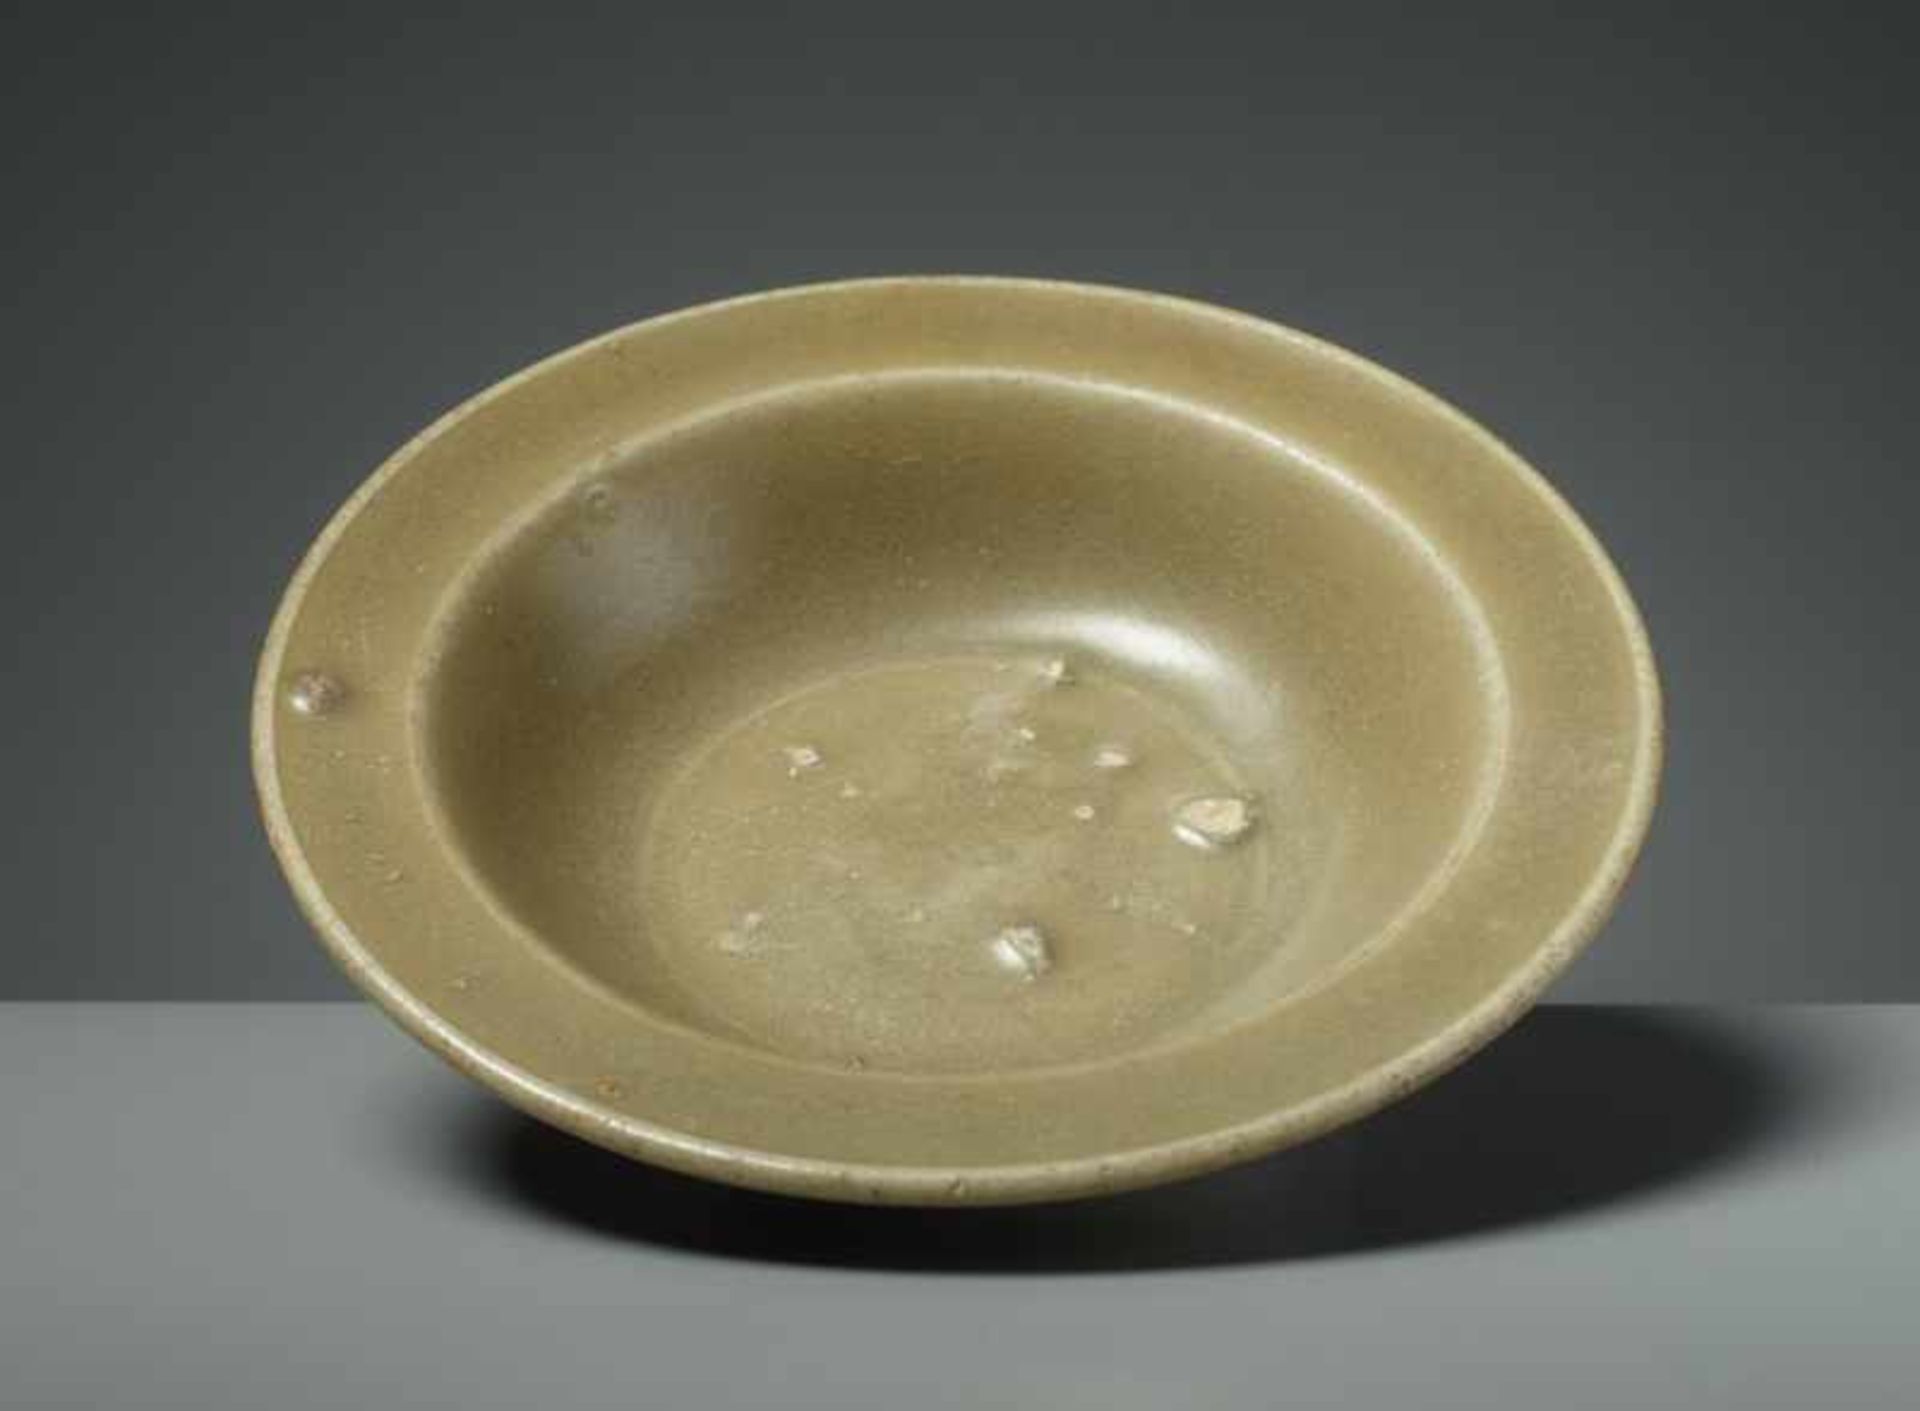 SMALL, FLAT BOWL Glazed ceramic. China, Southern Song to Yuan, ca. 12th -13th cent.Typical